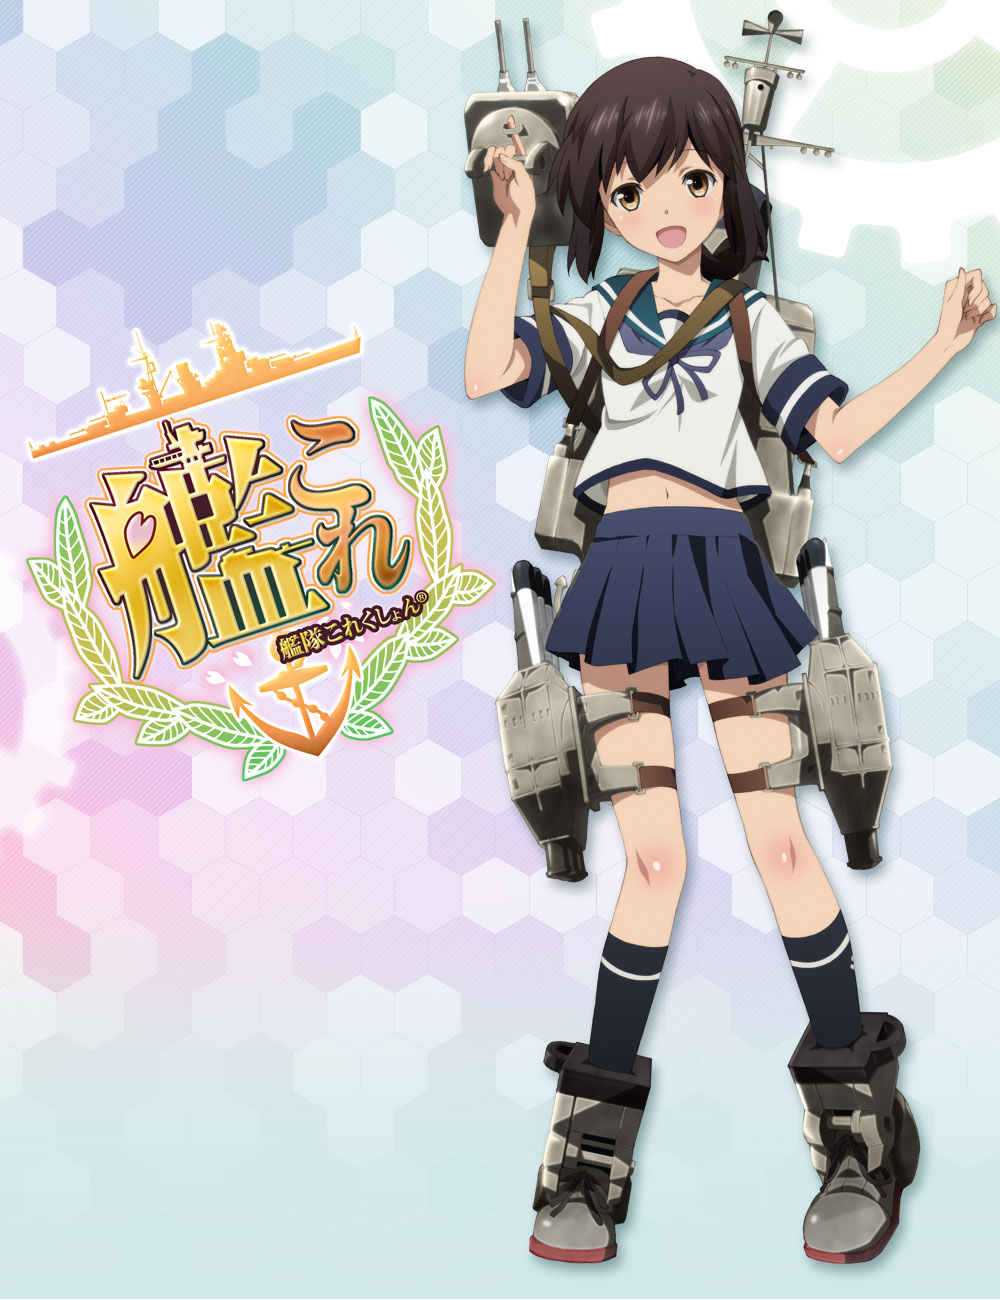 New Kantai Collection Kan Colle Anime Visuals & Character Designs Pic 2